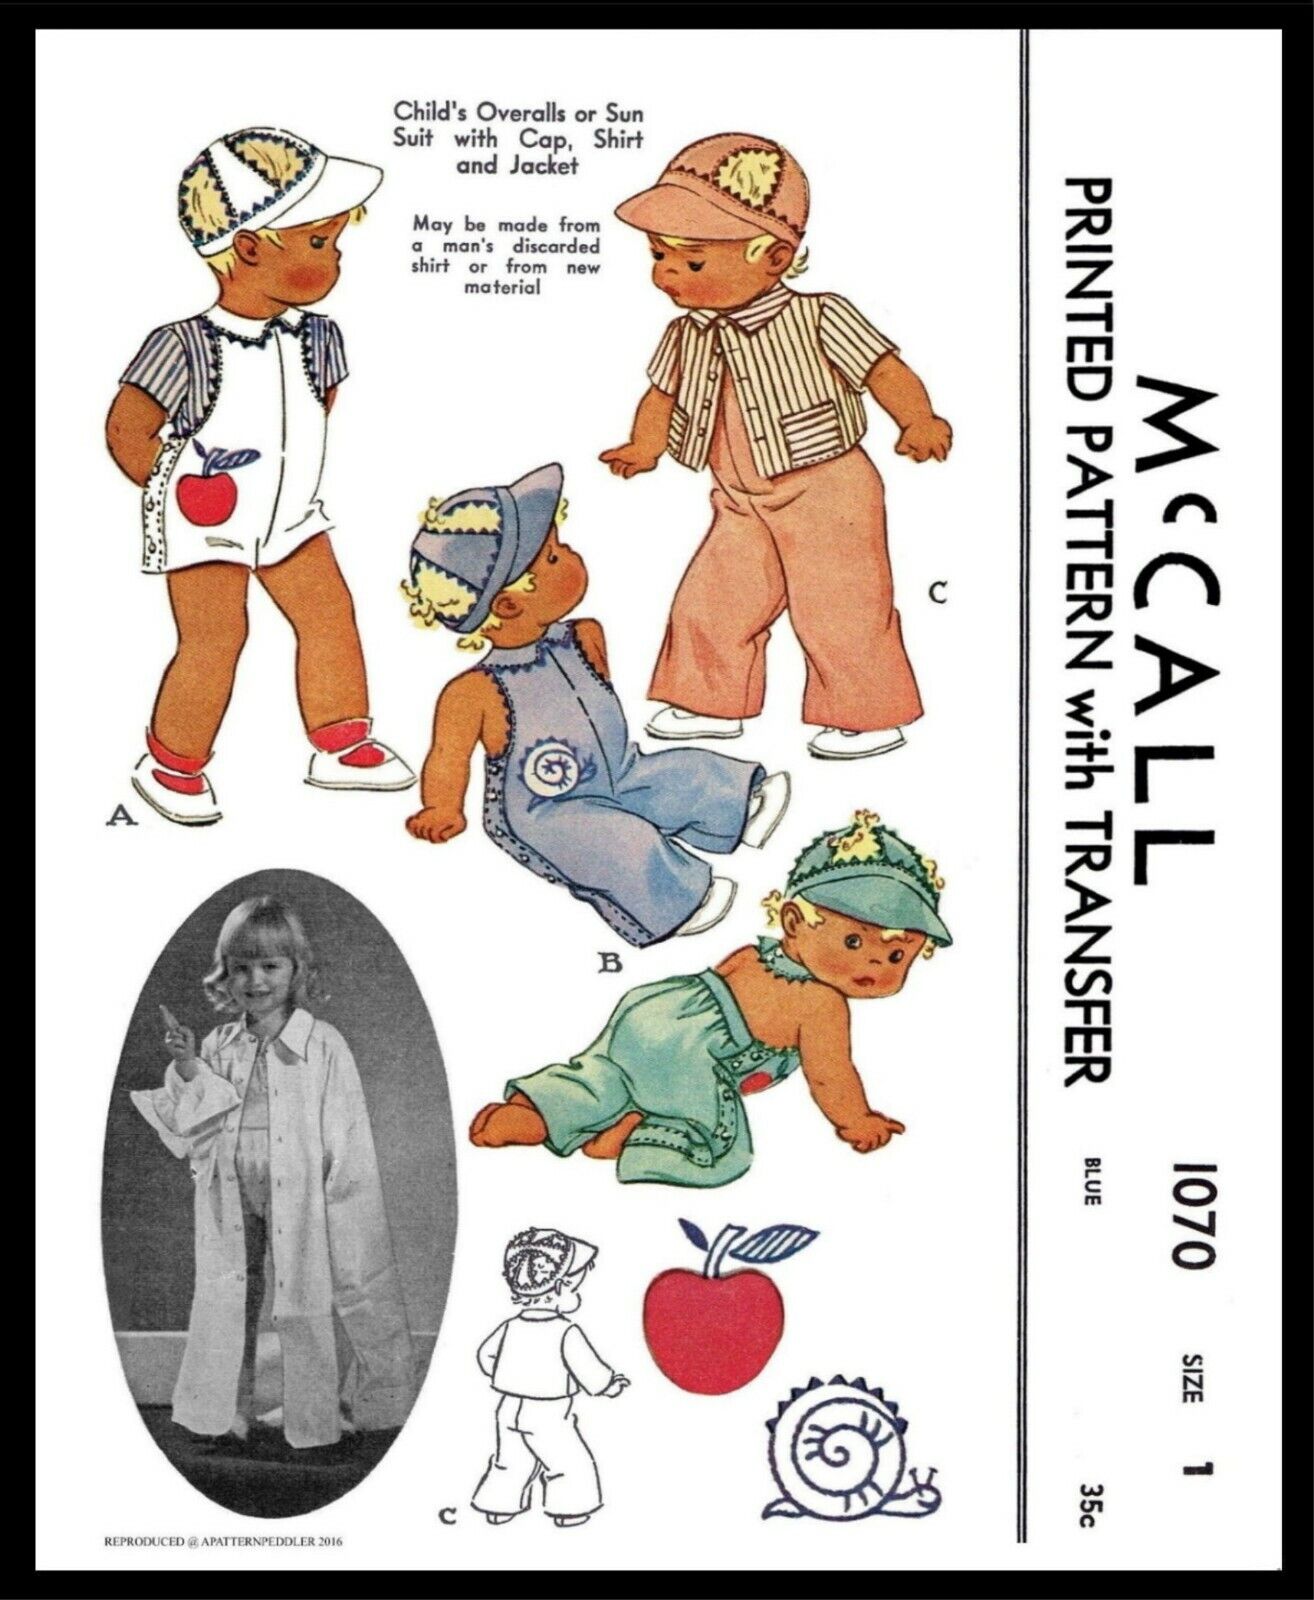 McCall #1070 Sewing Pattern BOYS SunSuit Playsuit Romper Vintage Overalls Doll 1